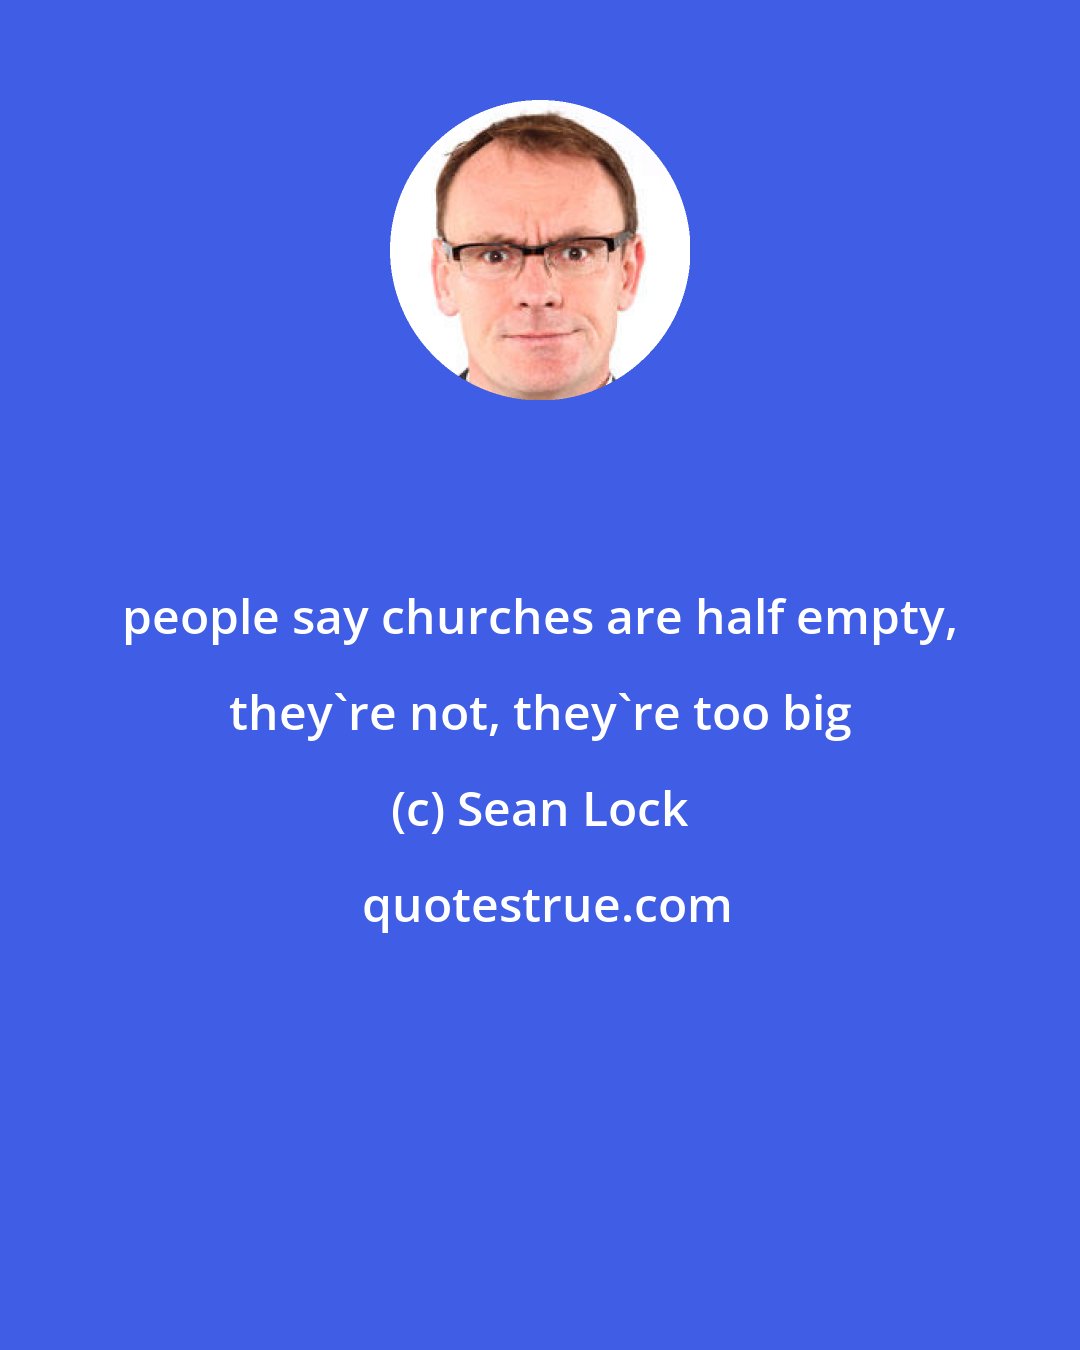 Sean Lock: people say churches are half empty, they're not, they're too big